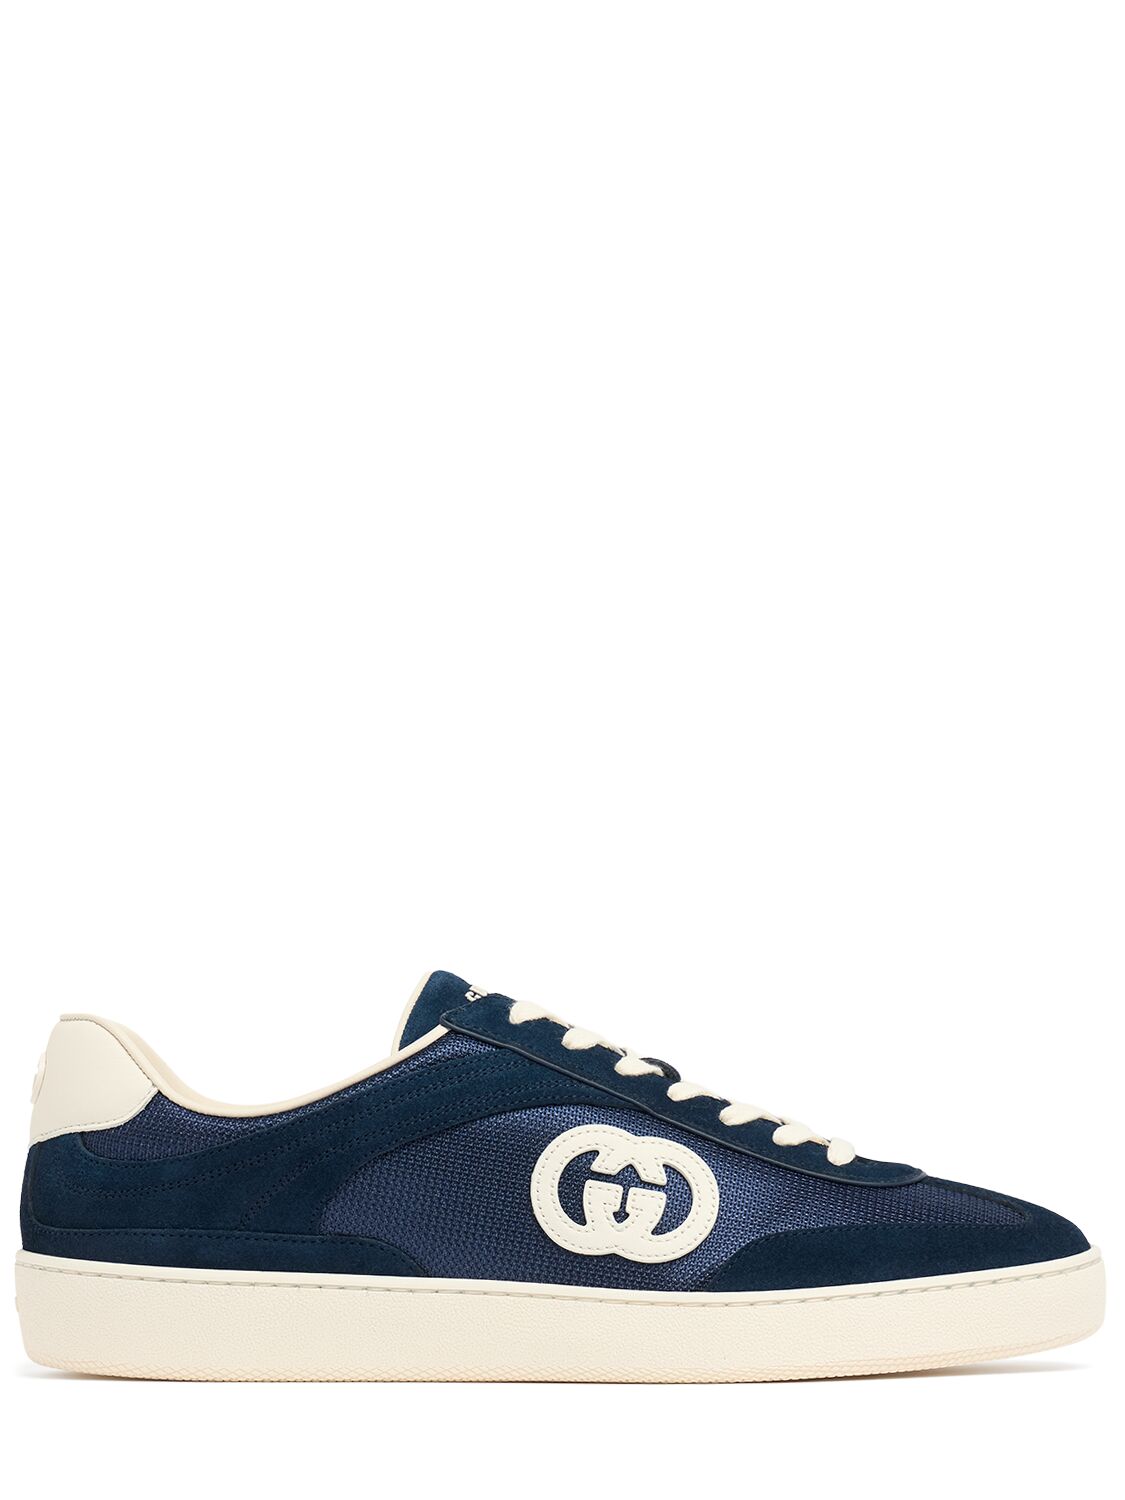 Gucci G74 Gg Suede & Fabric Sneakers In Blue